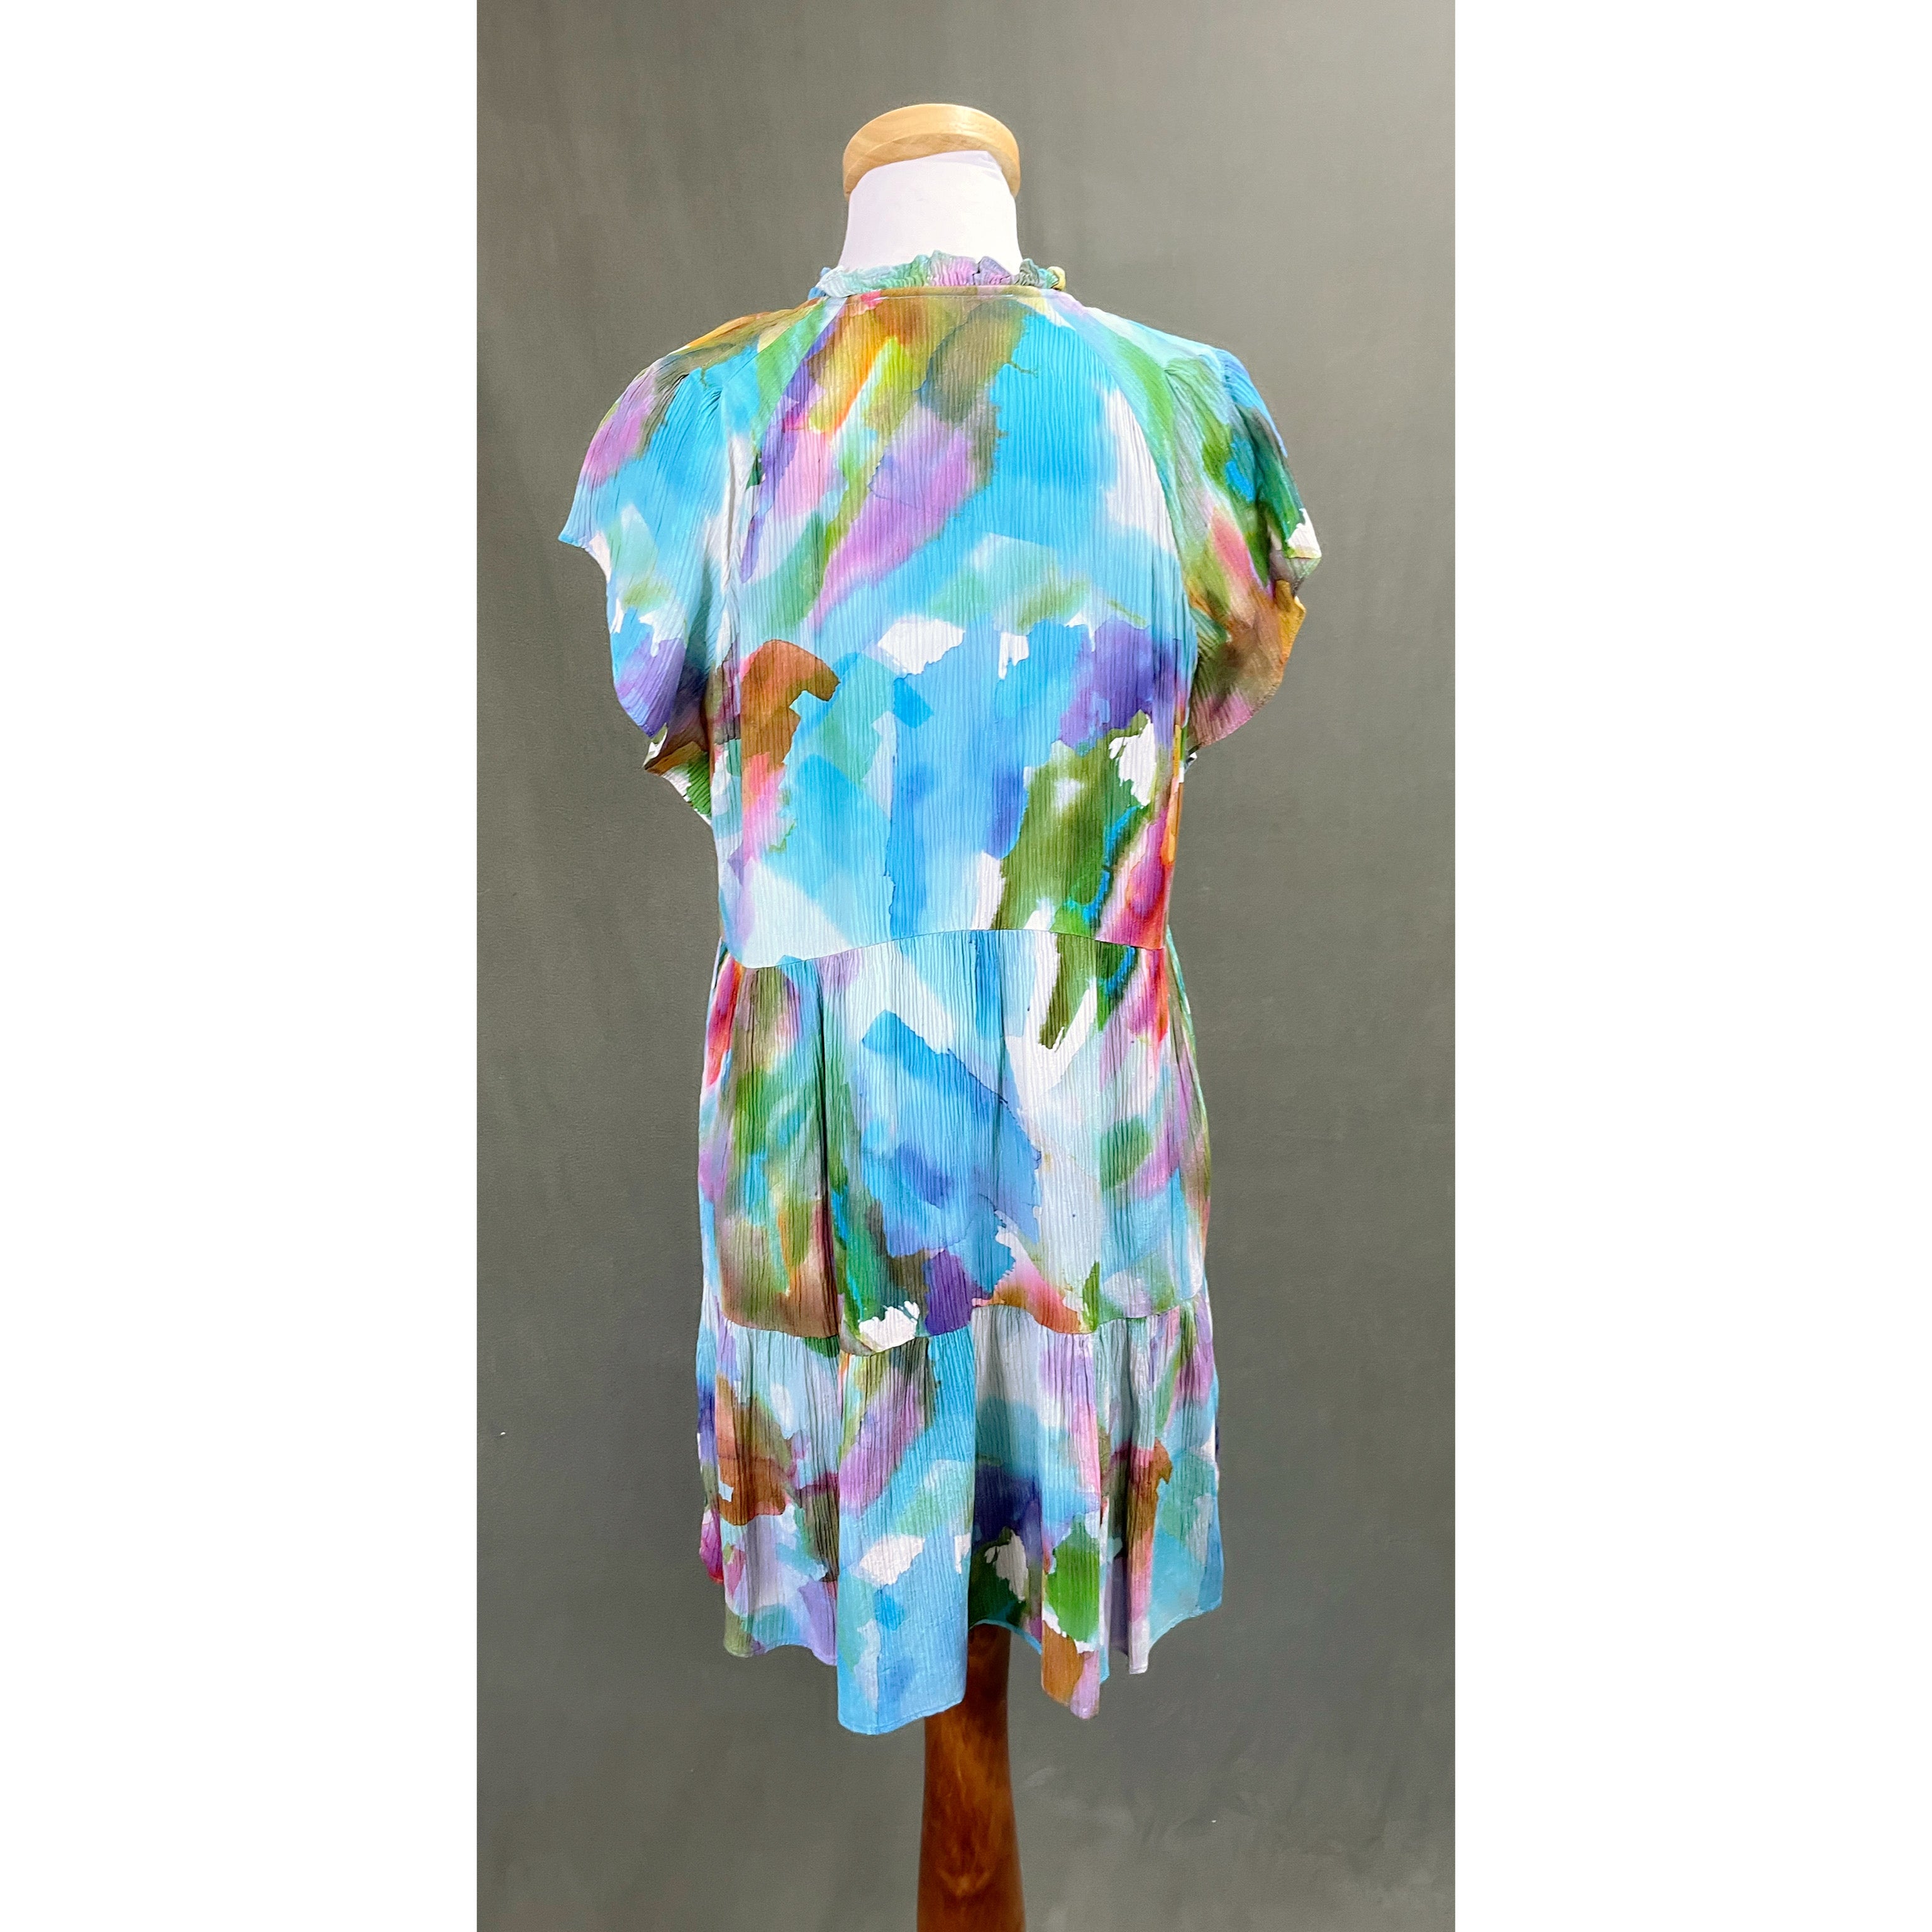 Marie Oliver blue watercolor dress, size XS & S